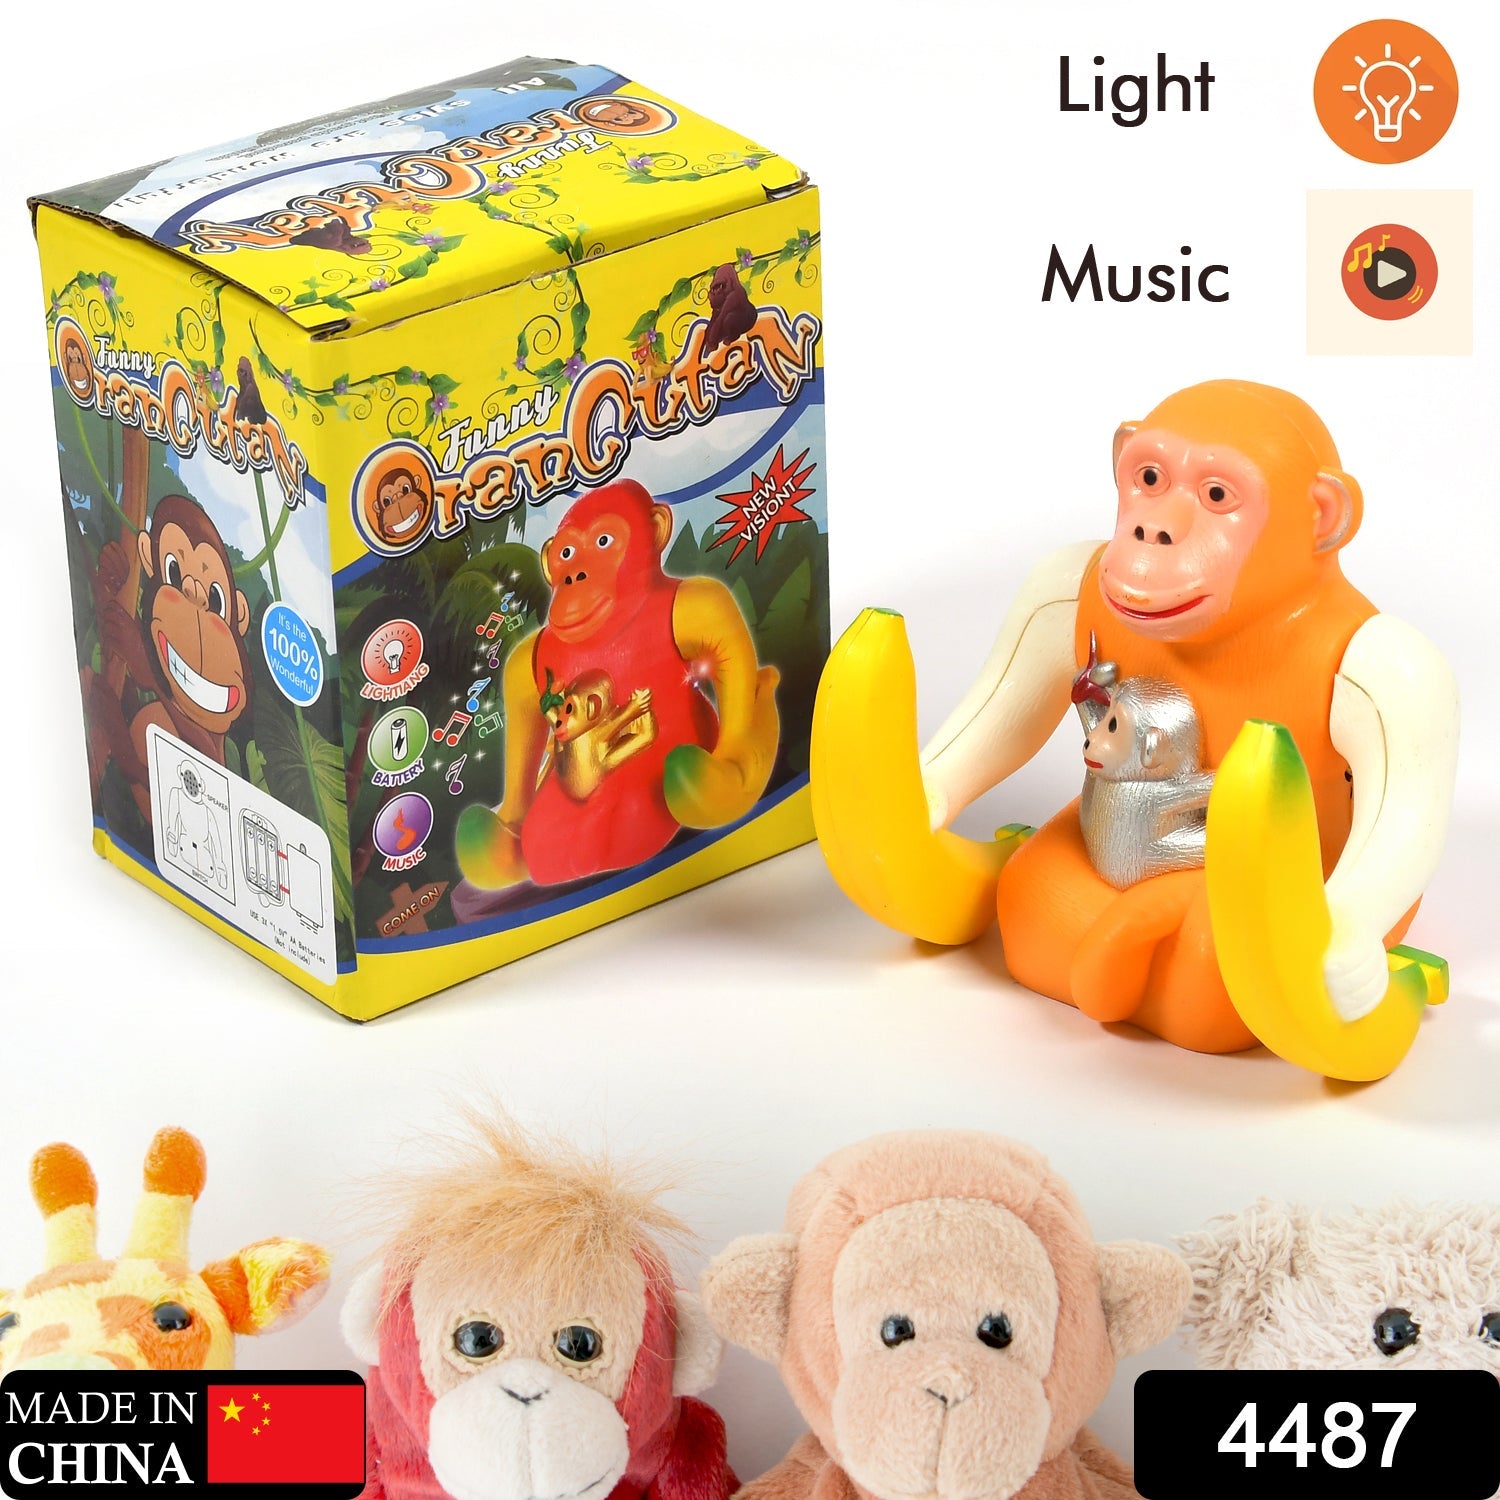 4487 Funny Banana Monkey Musical Light Jumping Skipping Funny Gift Toy for Kids